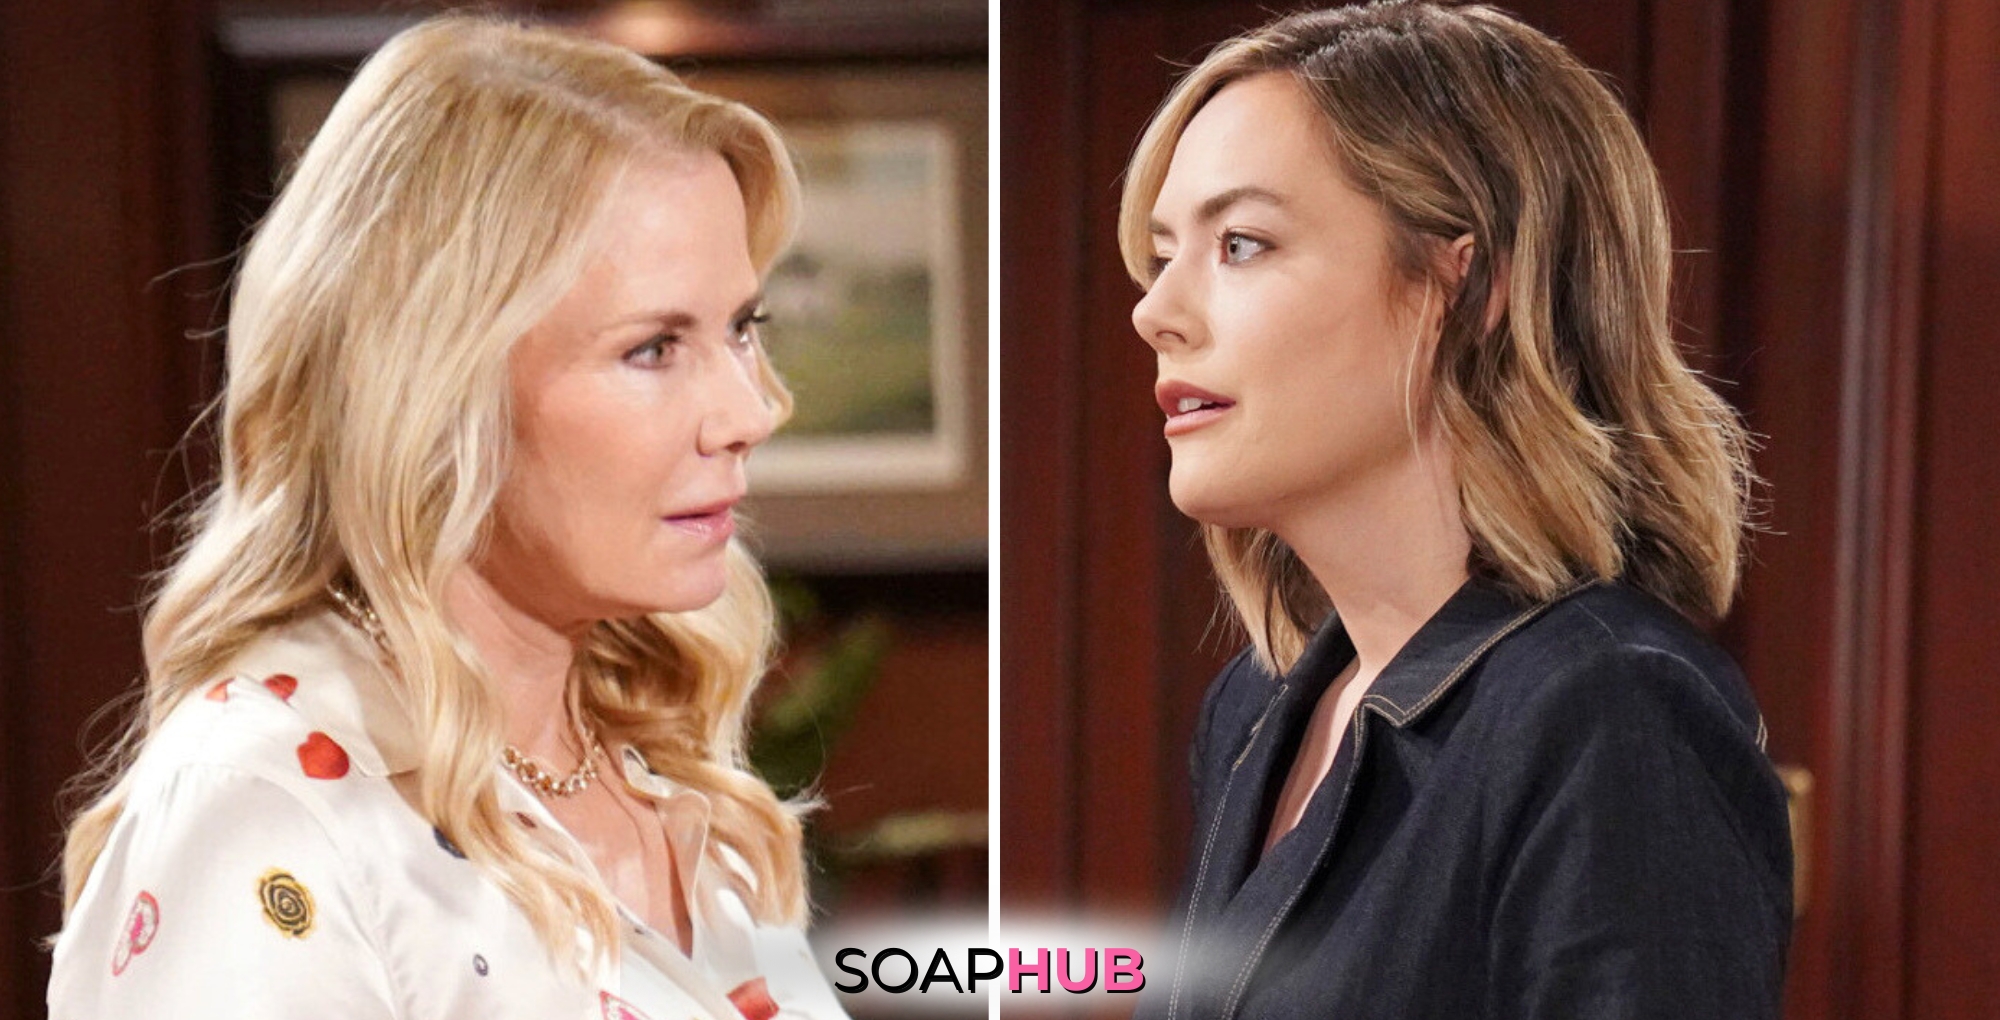 Bold and the Beautiful Spoilers for Wednesday, June 12, Episode 9292 Features Brooke and Hope with the Soap Hub Logo Across the Bottom.